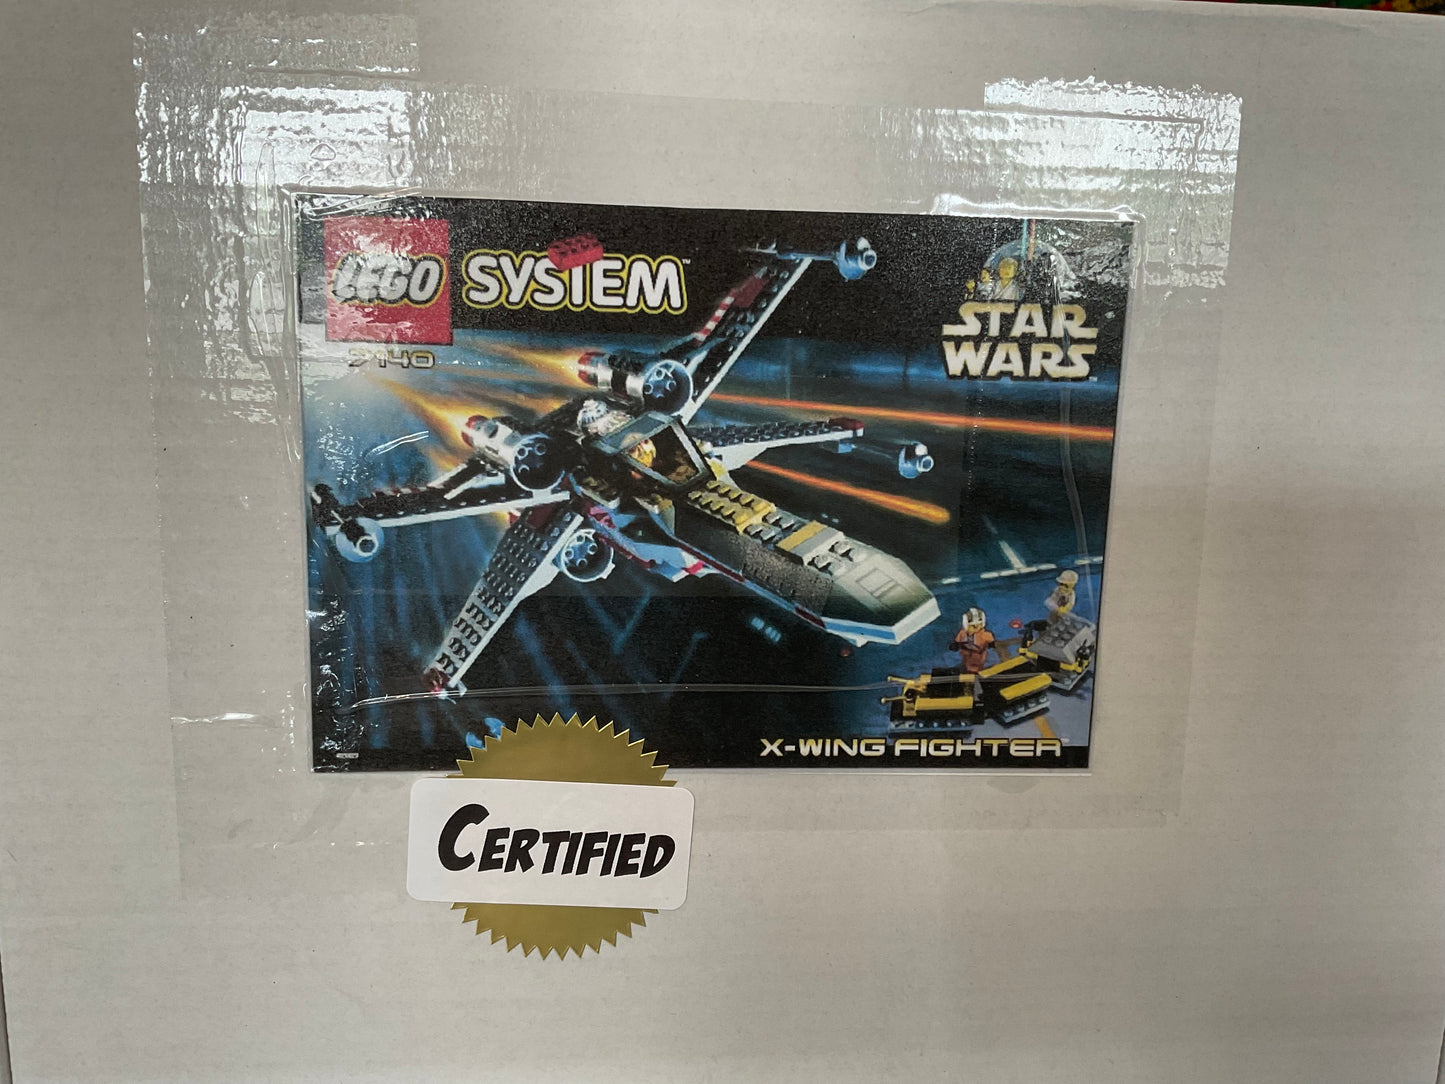 LEGO 7140 X-Wing Fighter - Certified